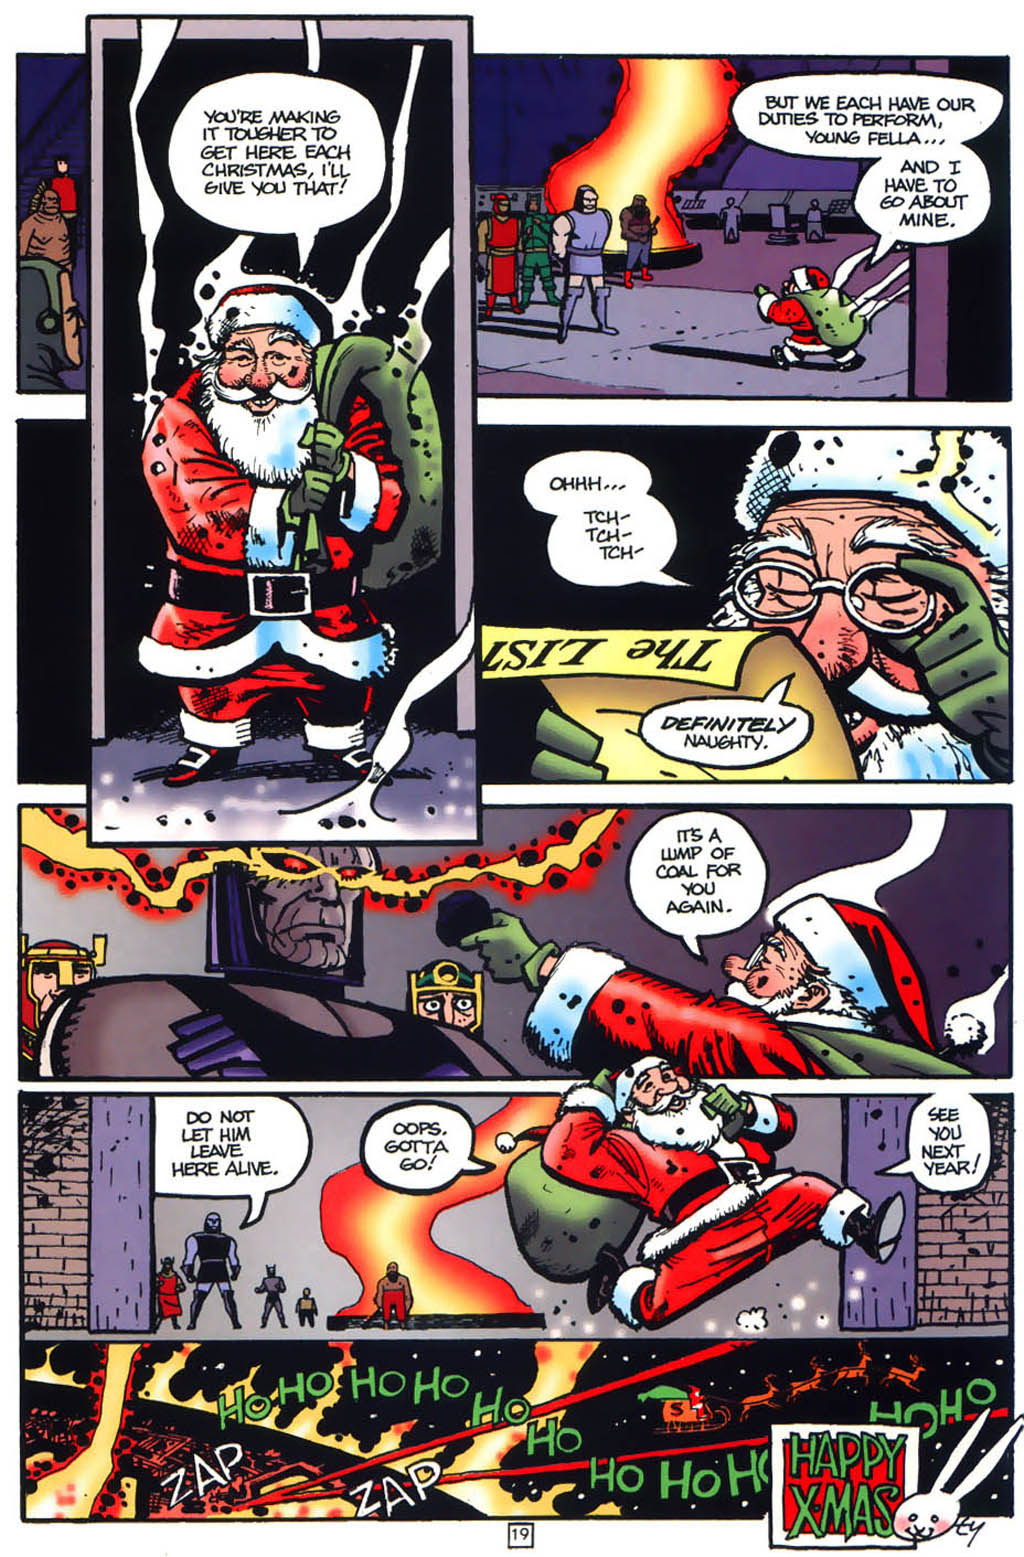 Santa Claus delivers a lump of coal to Darkseid and then flees from lasers to escape.